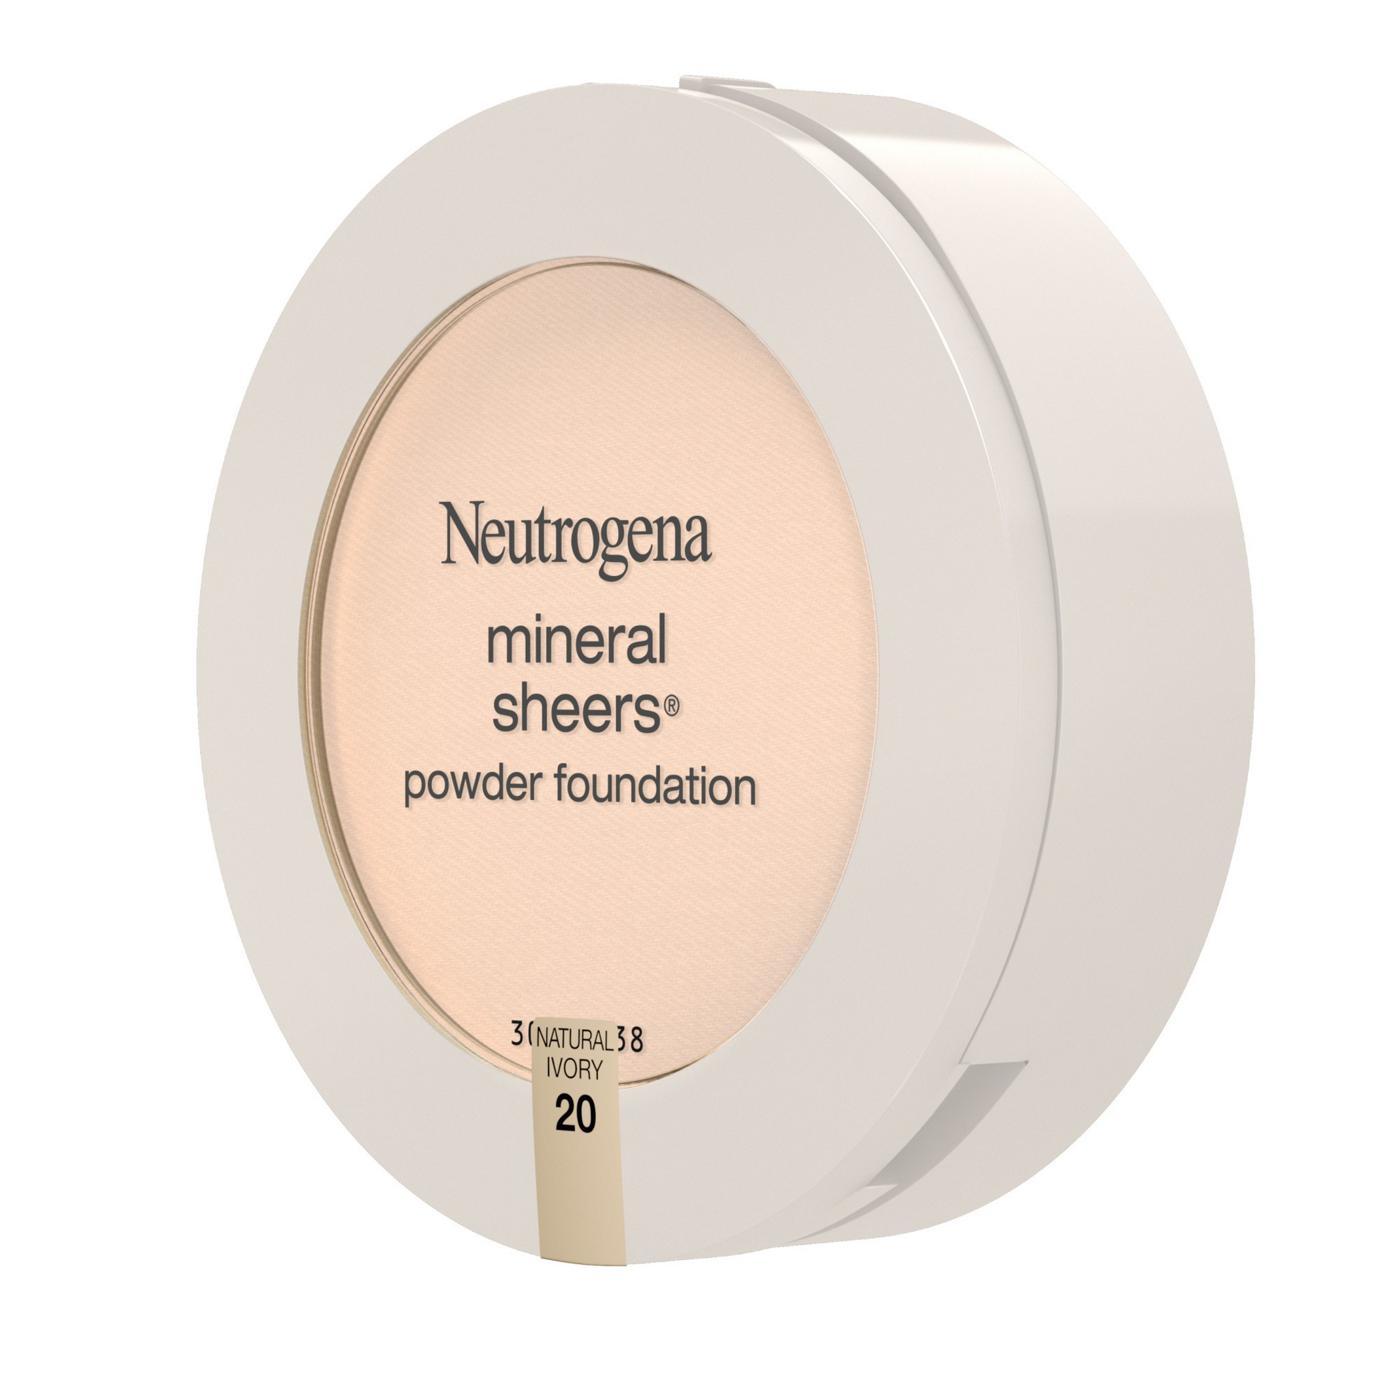 Neutrogena Mineral Sheers Compact Powder Foundation 20 Natural Ivory; image 6 of 6